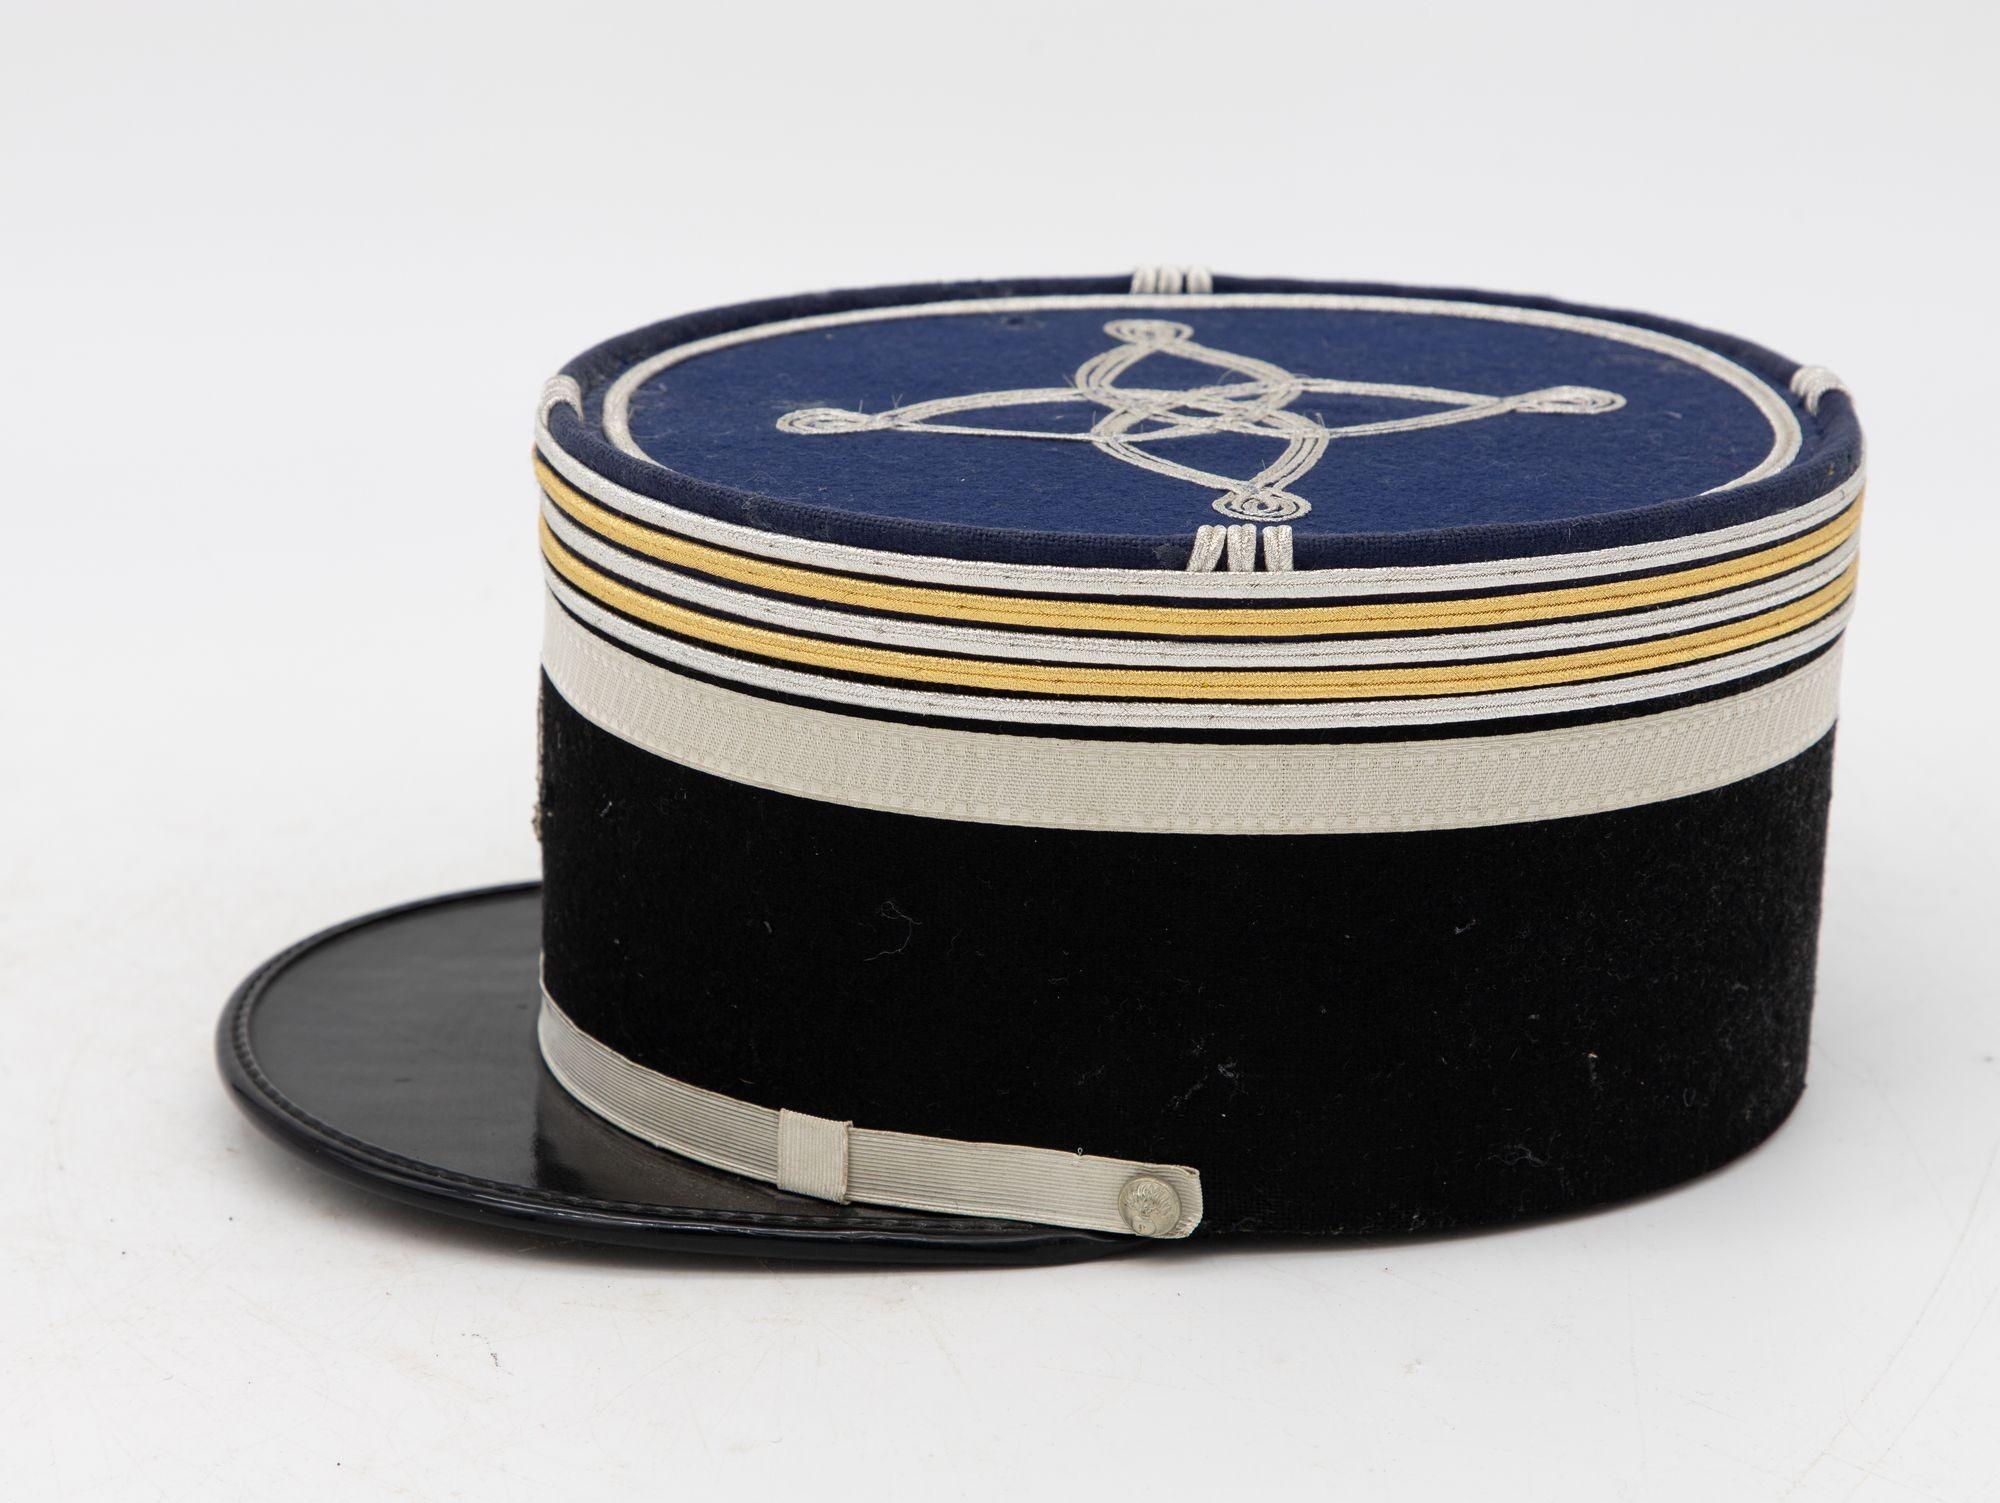 A rare French Military Academy Officer's hat or cap from the 1970s. These special and unique hats are part of the uniform of students studying to become officers in the French Military. This is a highly unusual and heavily ornamental cap making it